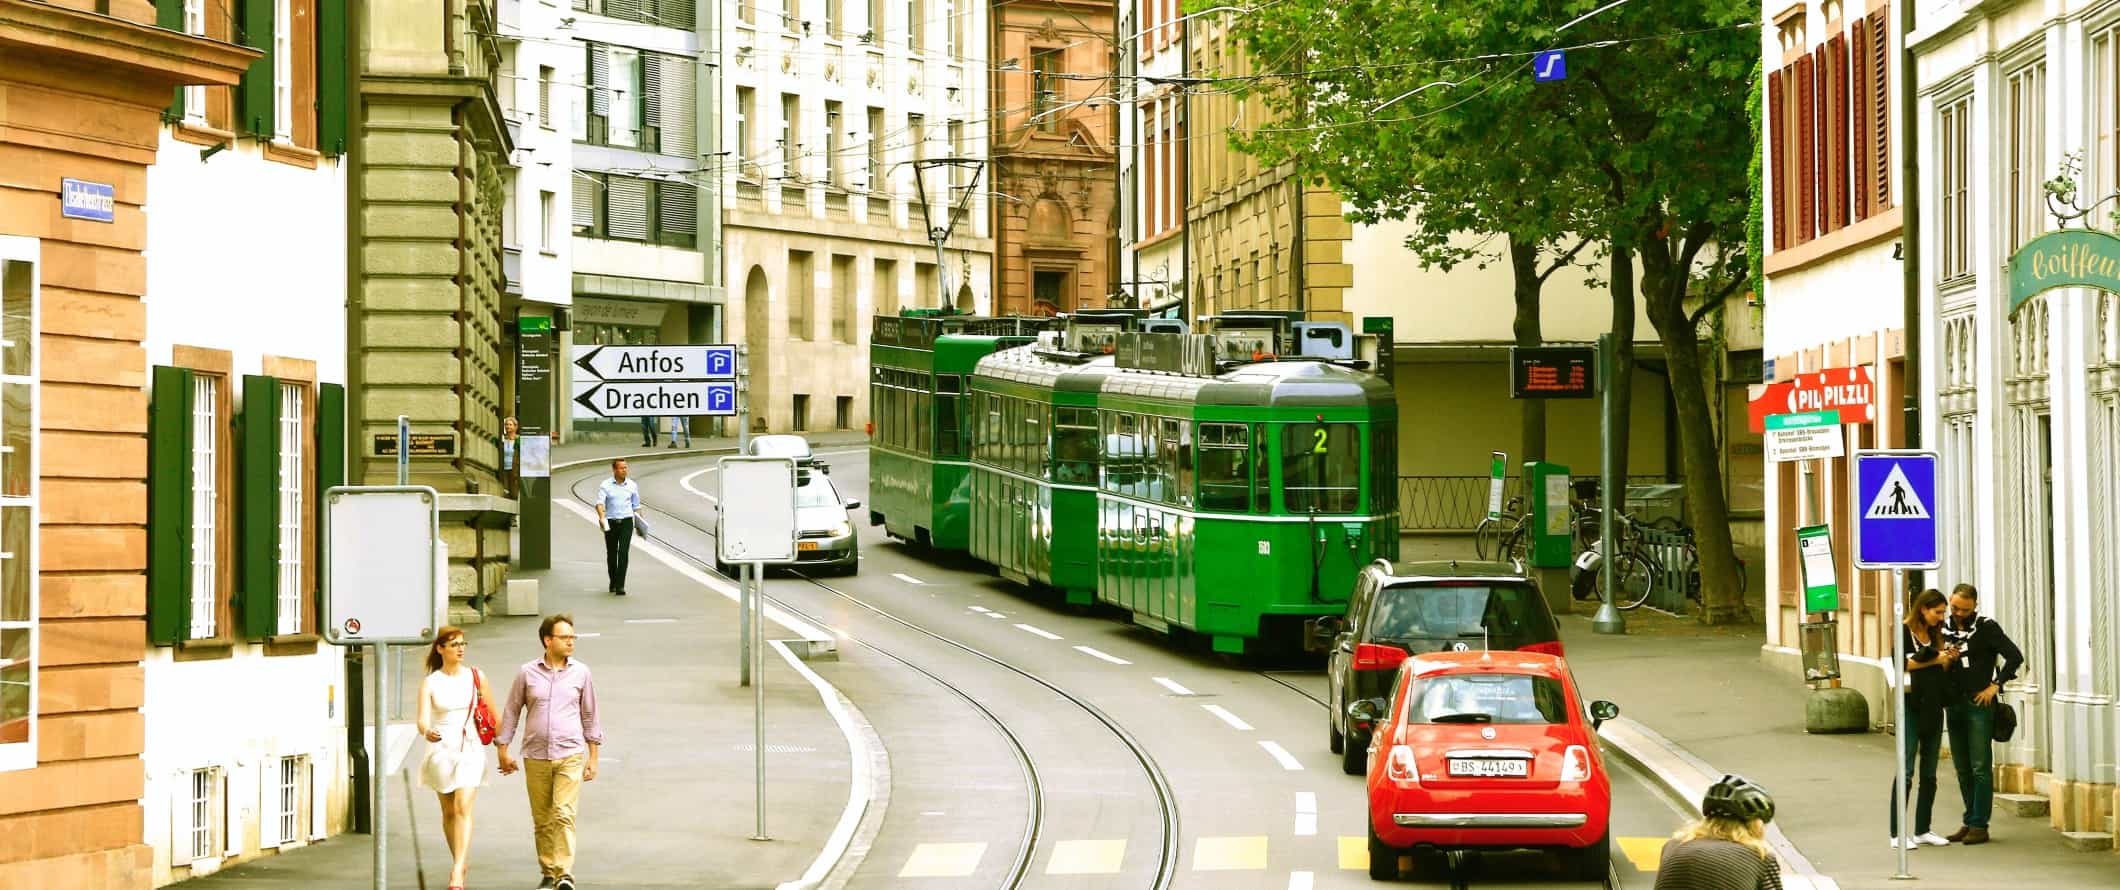 Curved street with a tram going down it in Basel, Switzerland